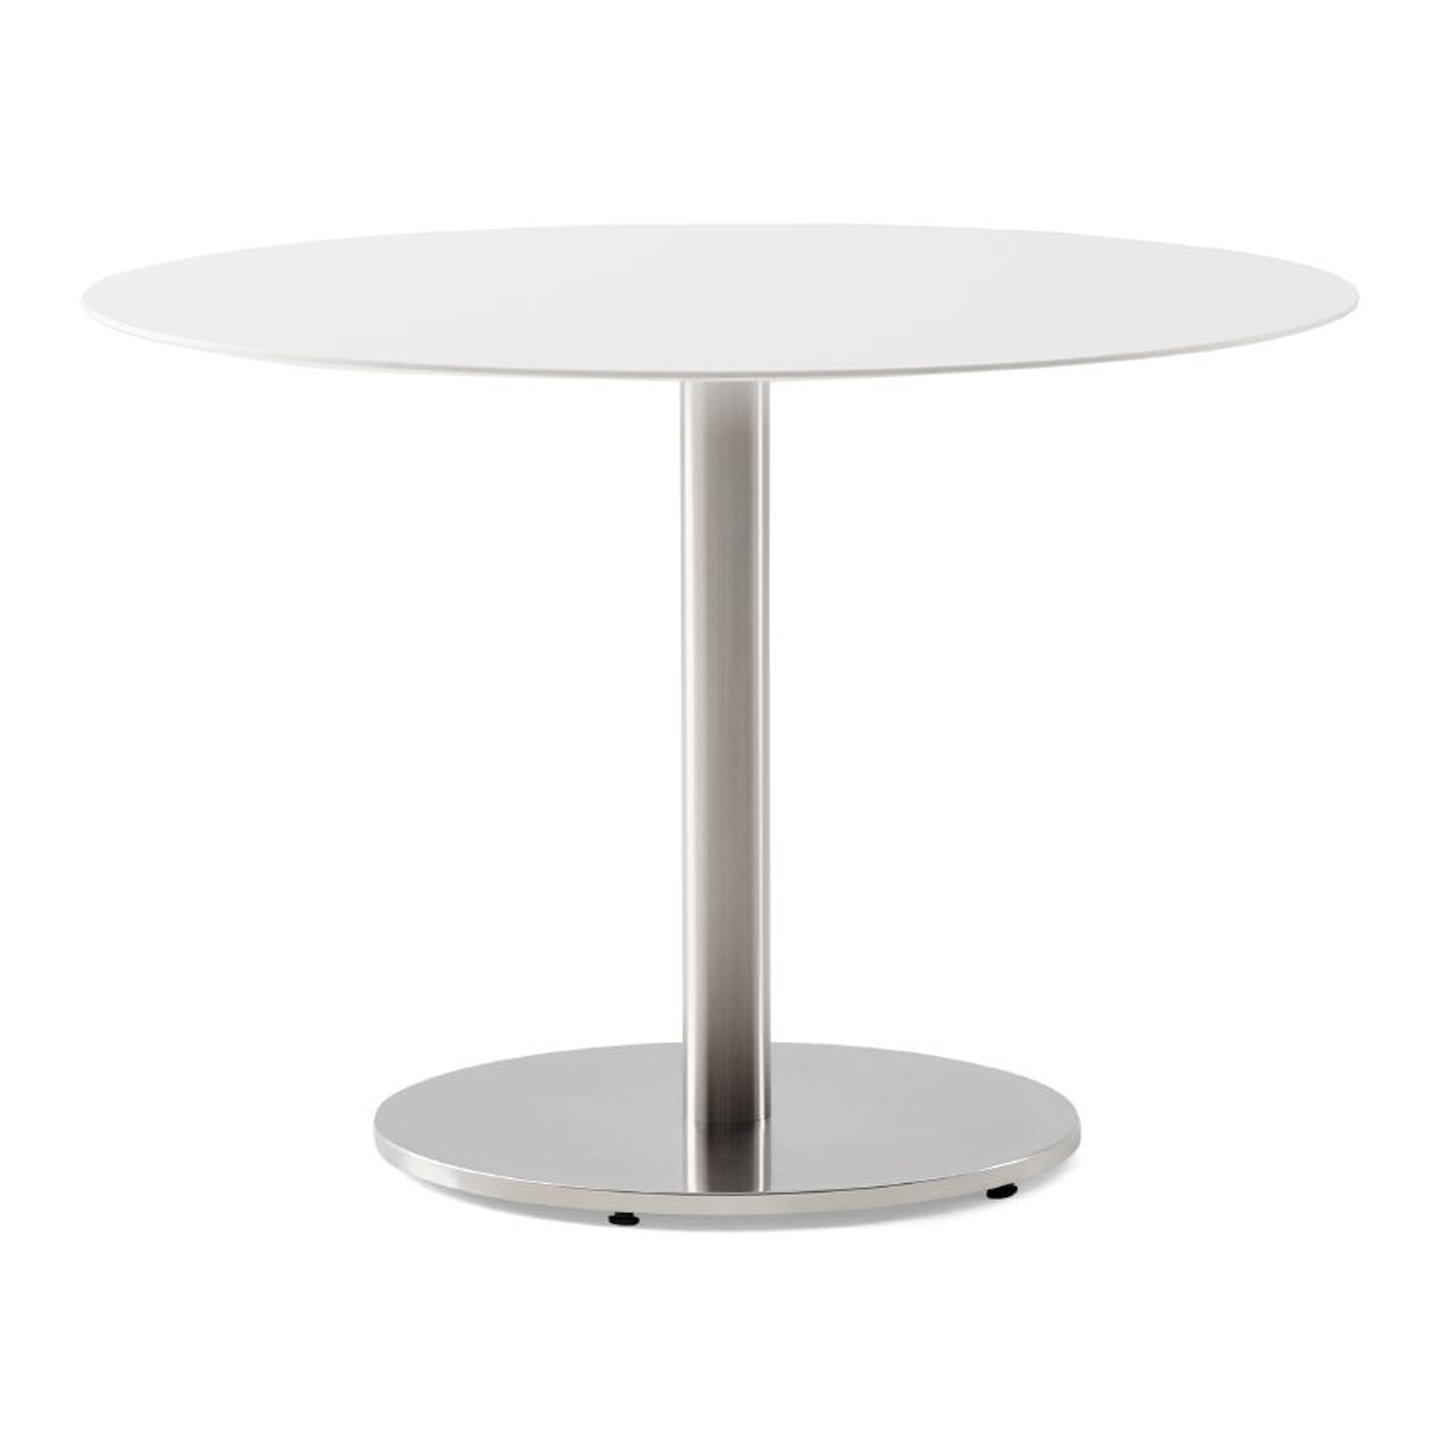 Haworth Janus Cafe Table in brushed stainless steel with circular top and circular base